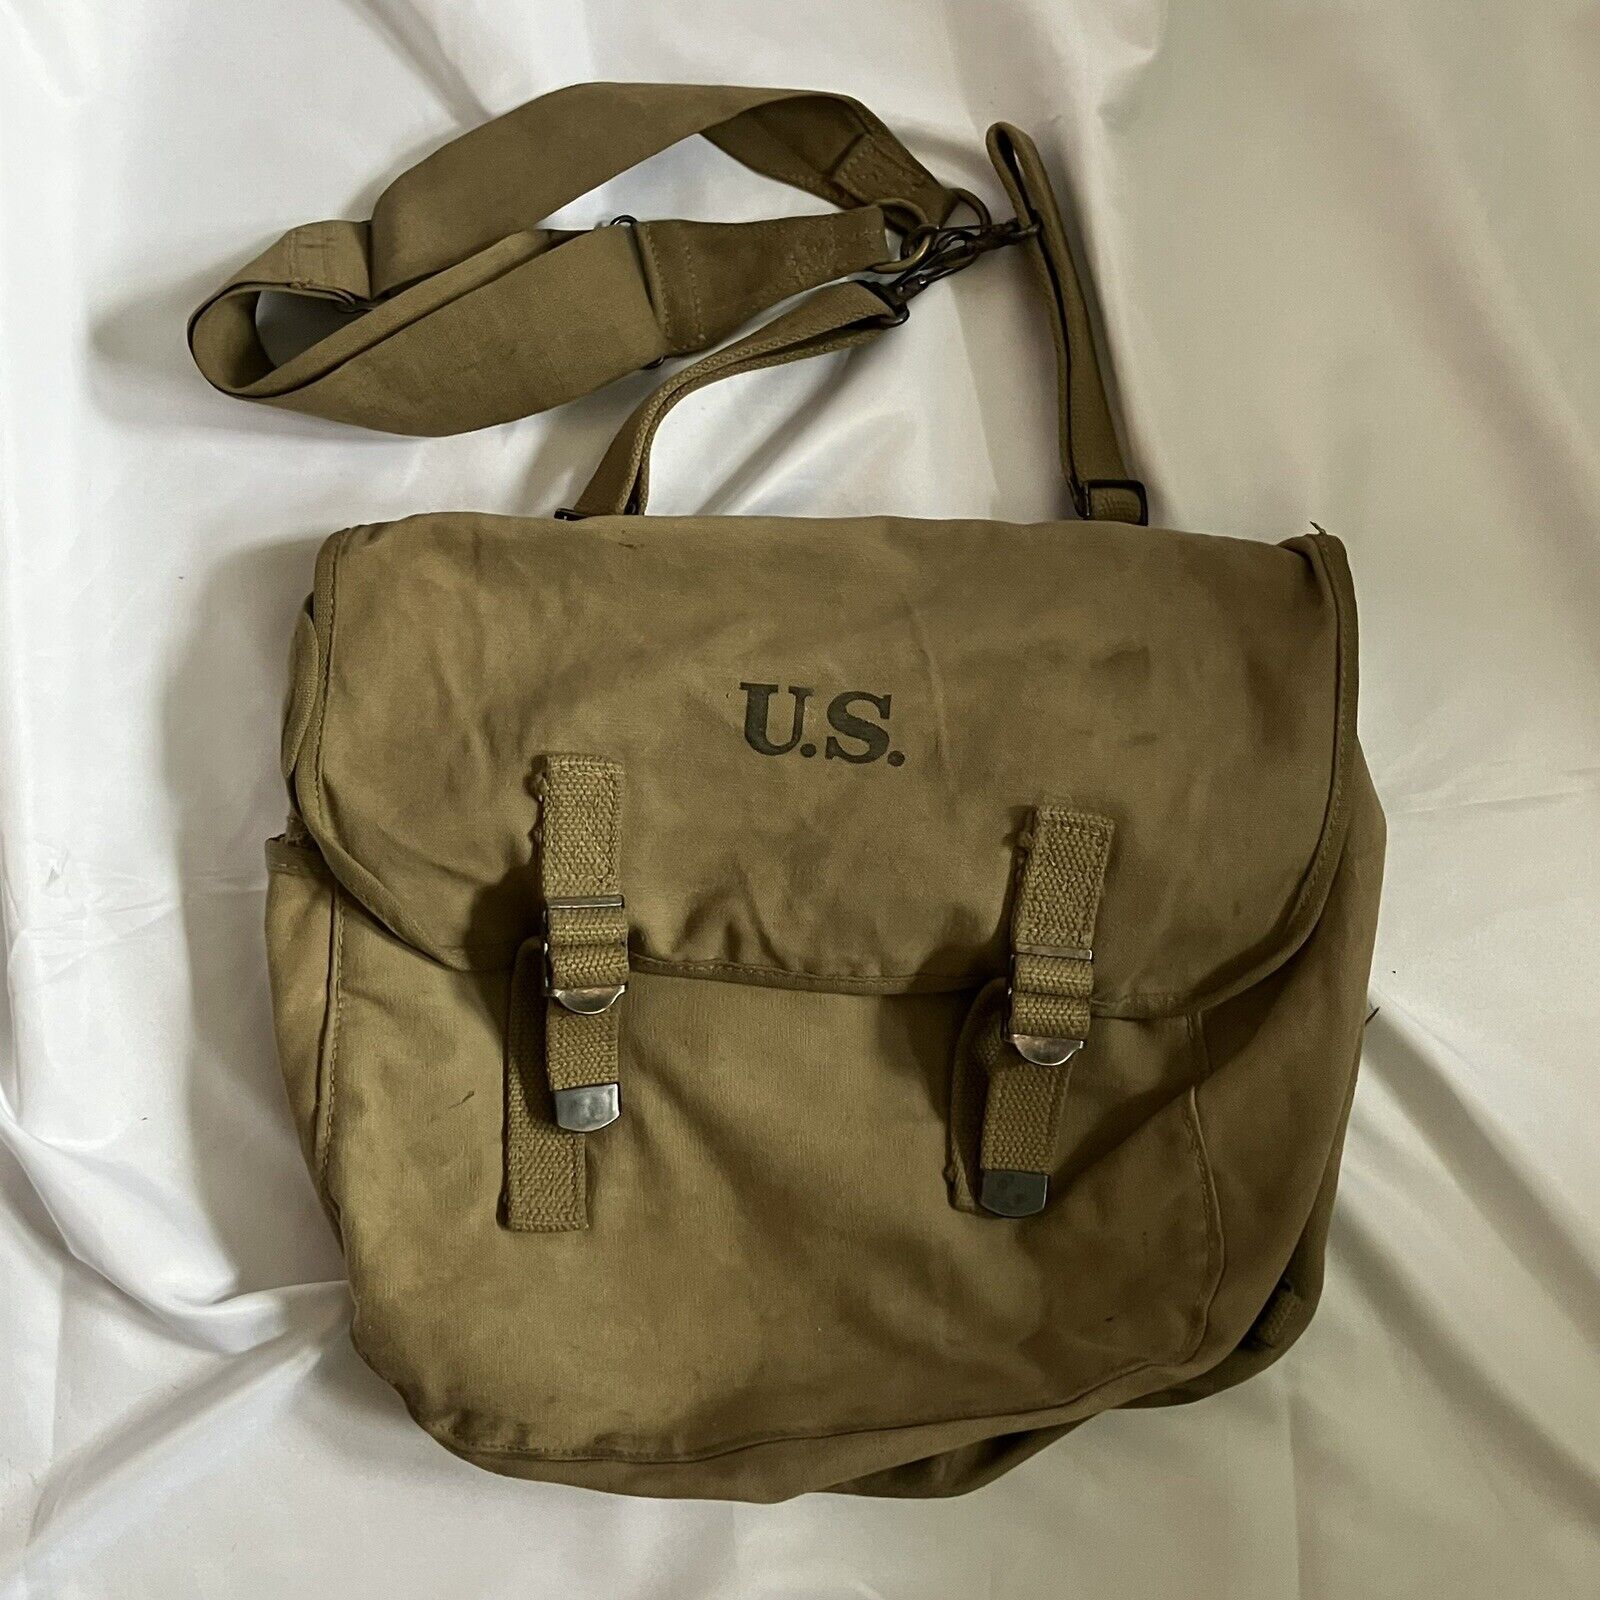 Ww2 Us Army M1936 Canvas Musette Bag Pack Khaki Color Dated 1942 Issued Wwii